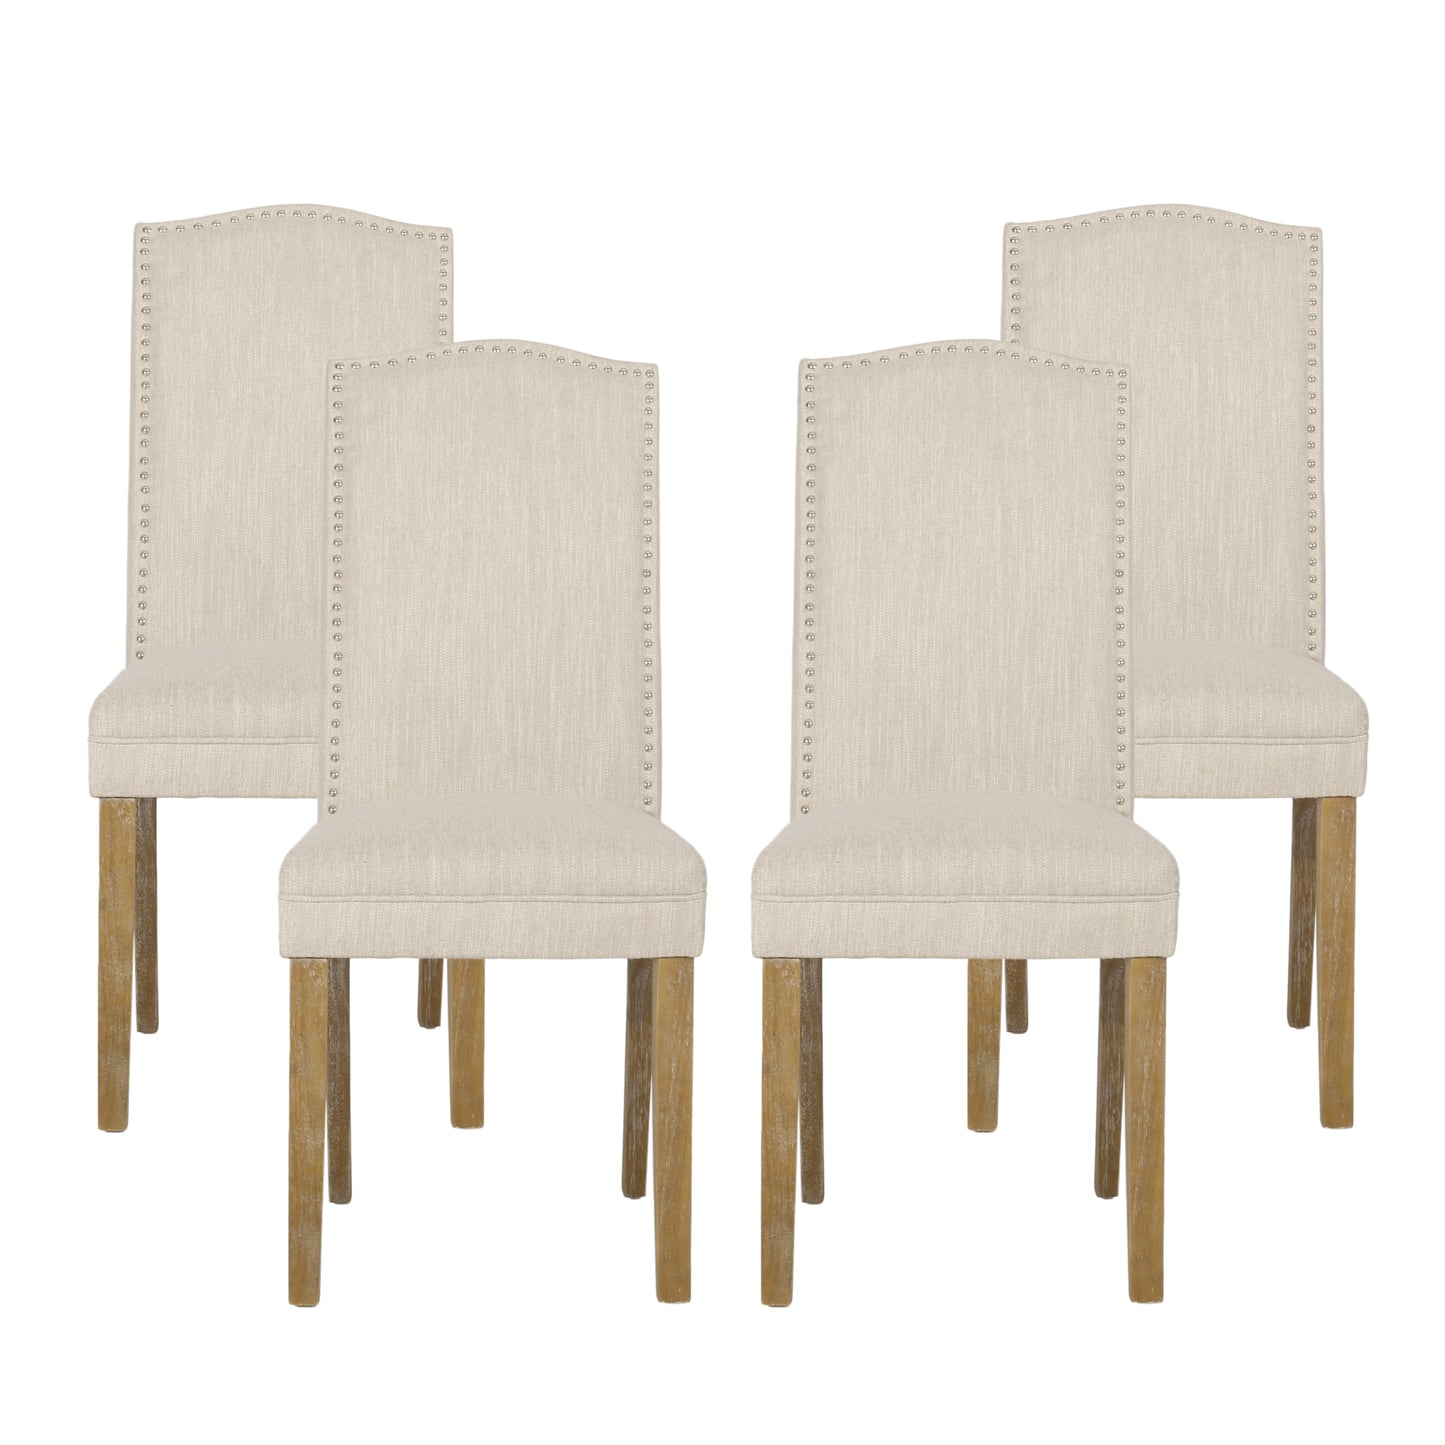 Geromin Contemporary Fabric Dining Chairs with Nailhead Trim, Set of 4